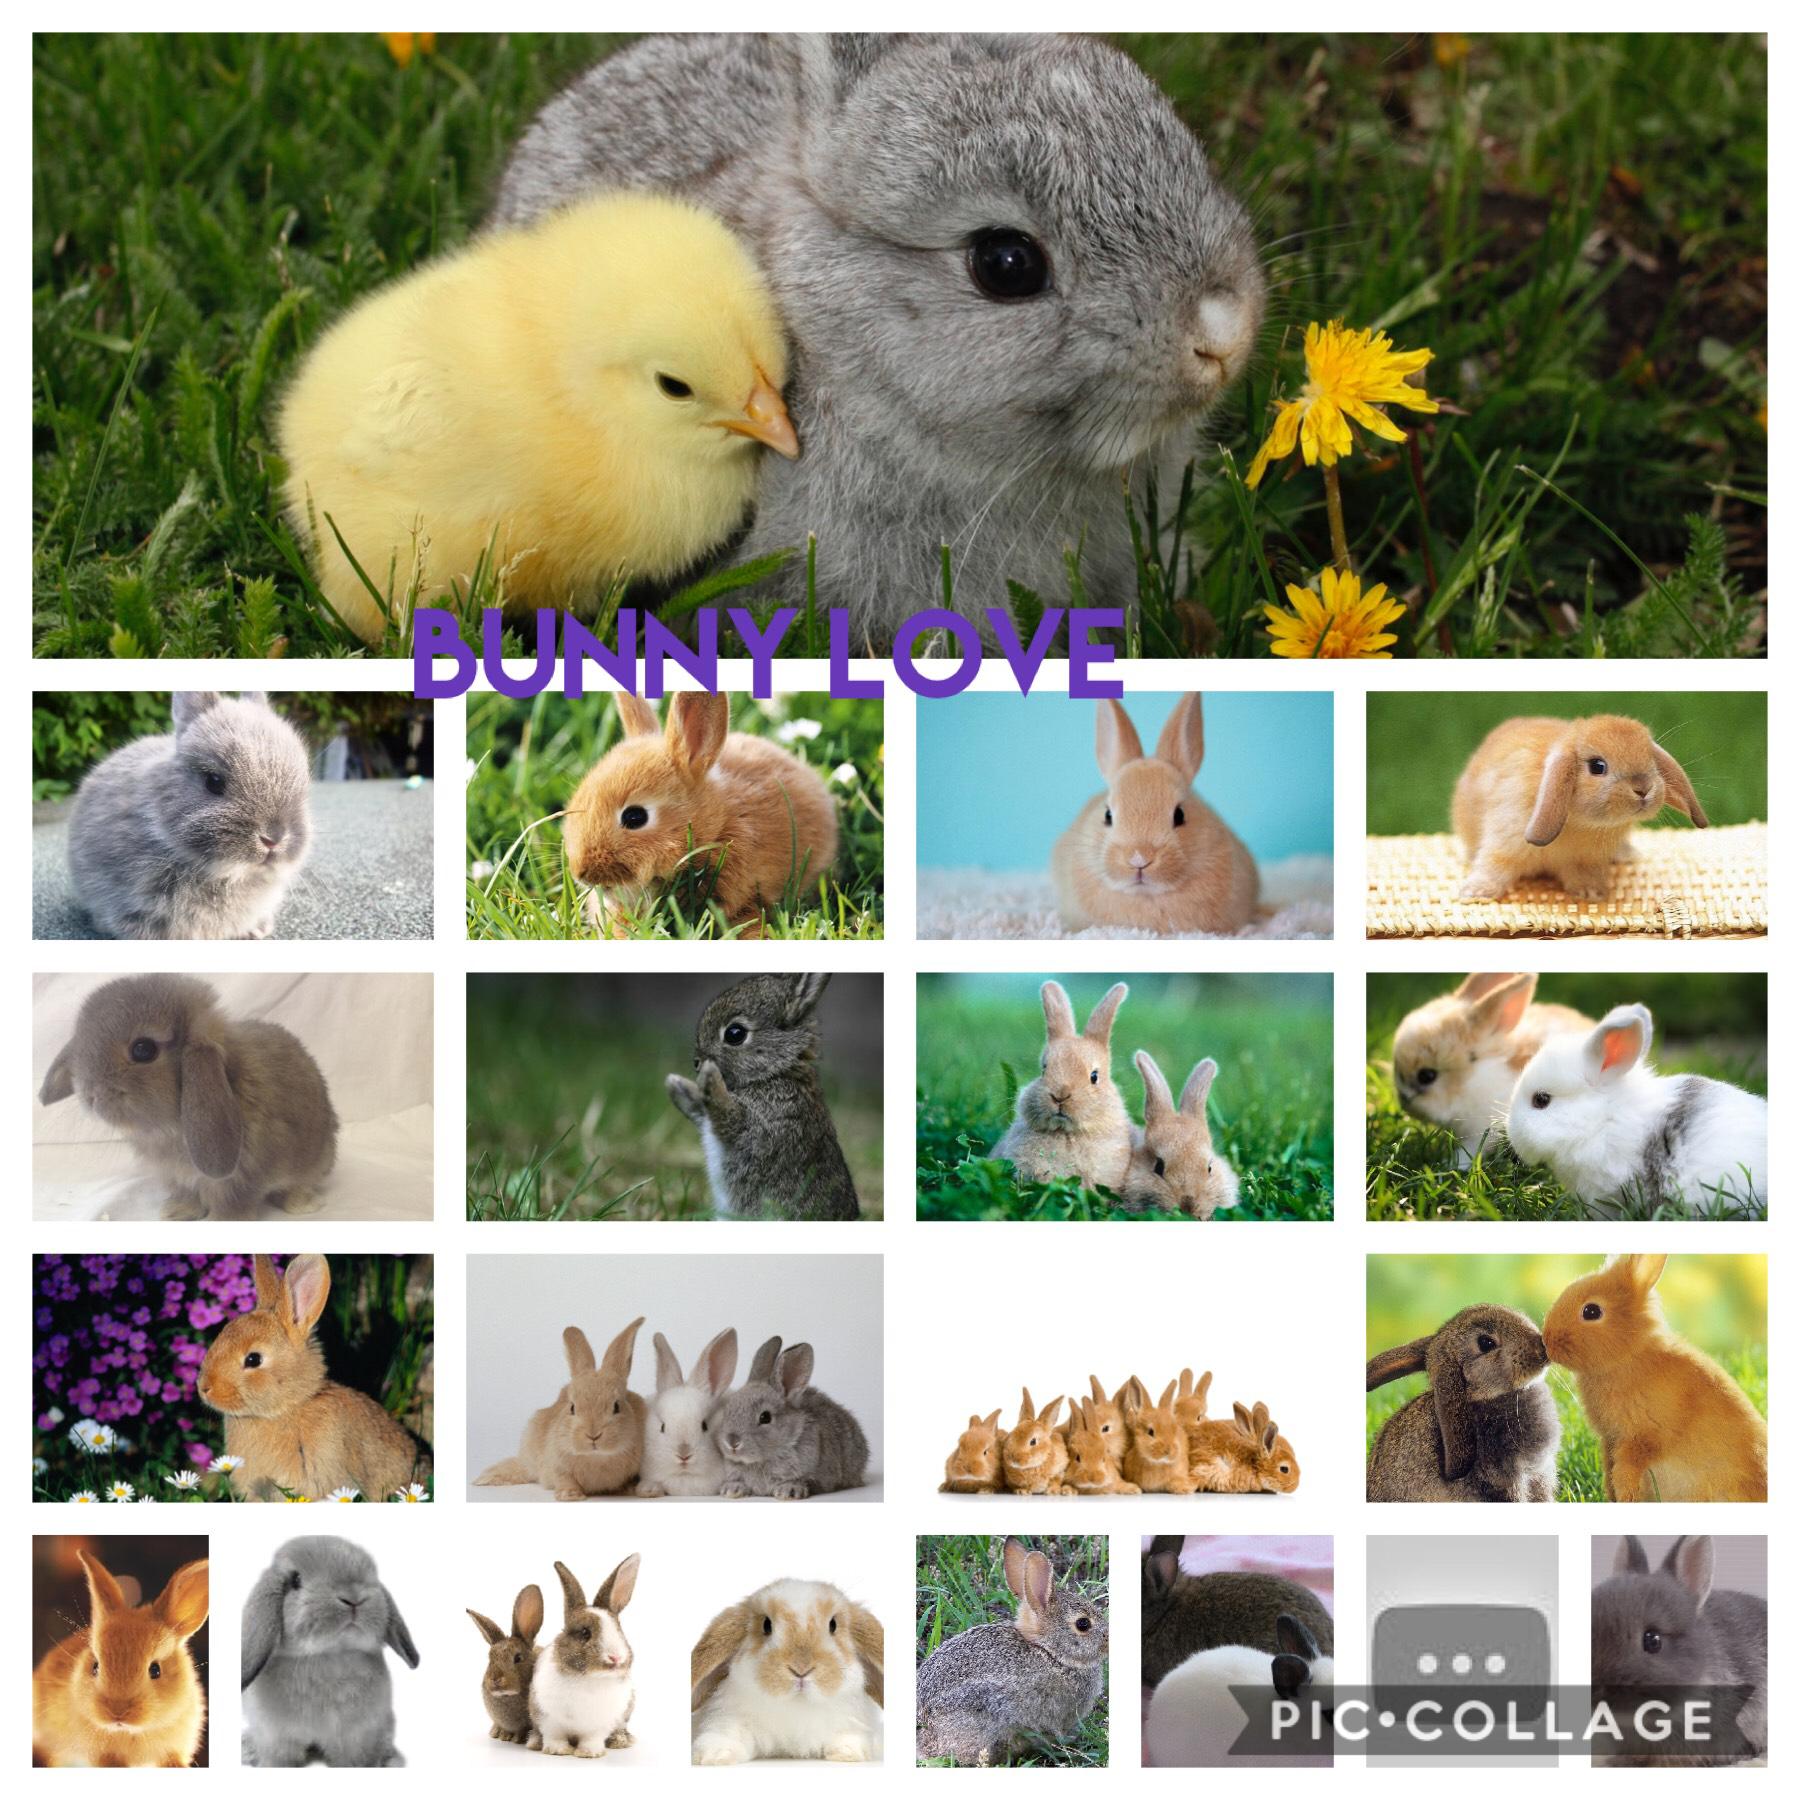 Who loves bunnies 😍🤪😛❤️💜